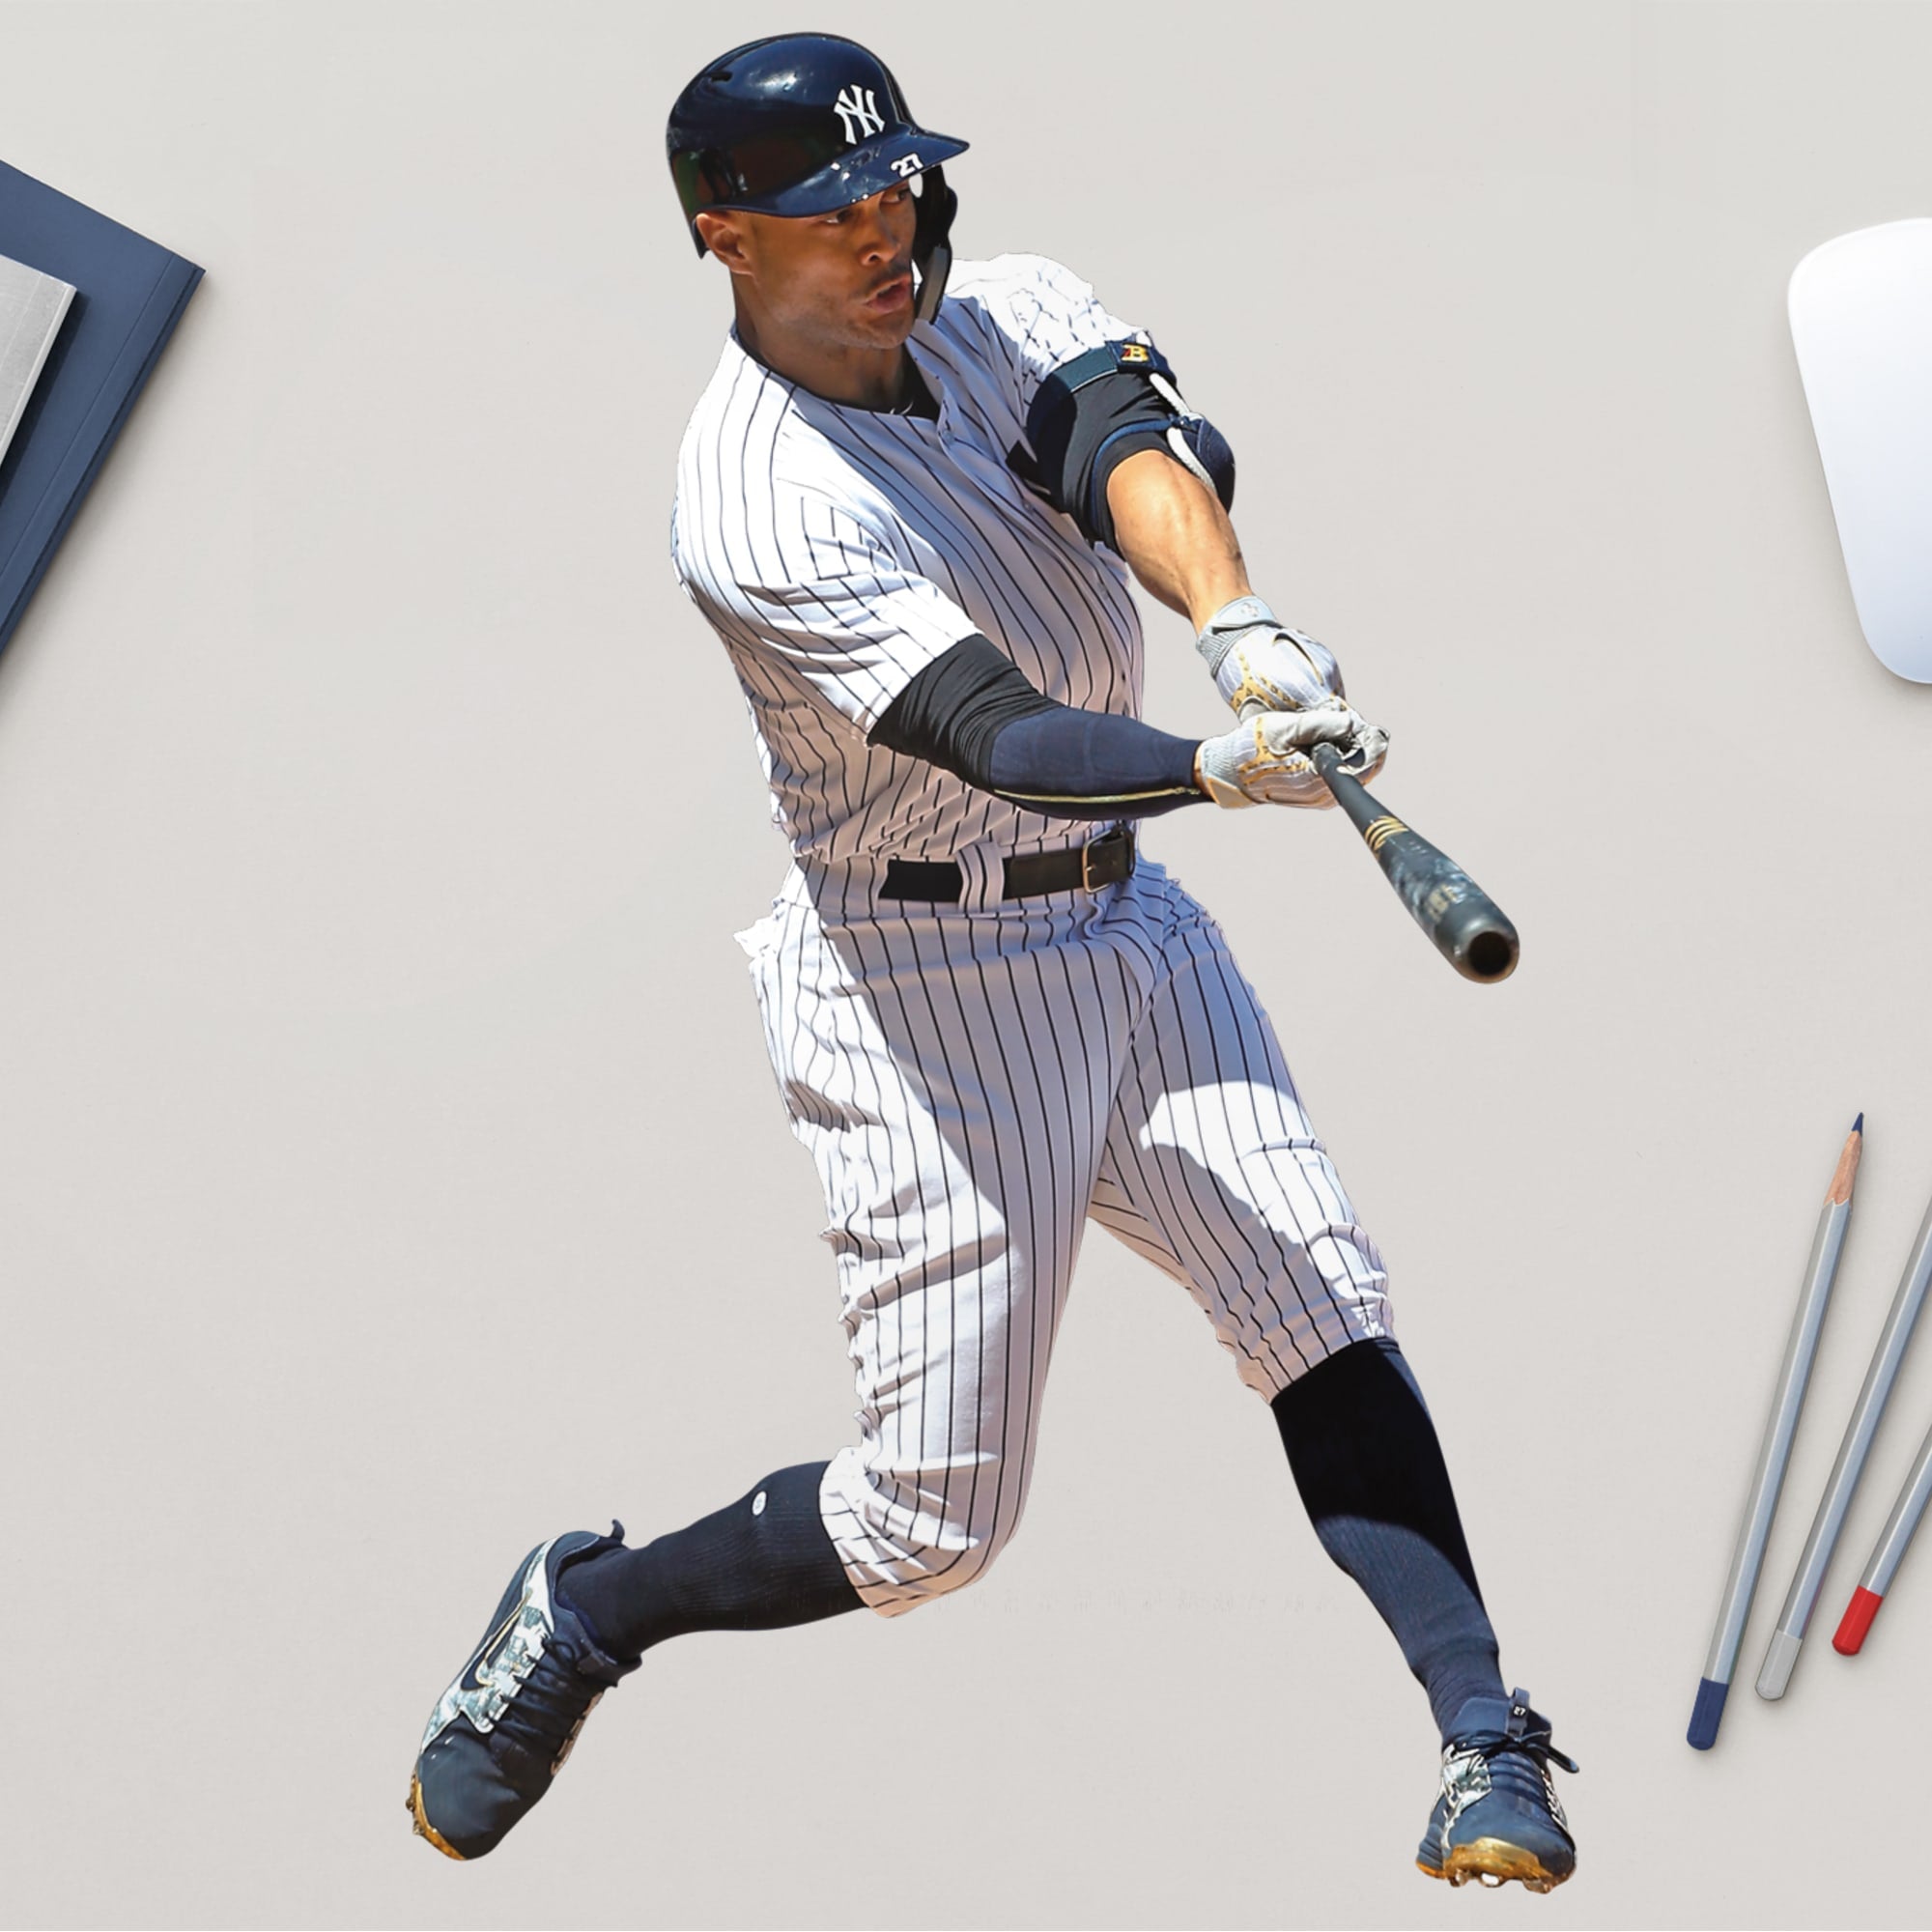 Giancarlo Stanton for New York Yankees - Officially Licensed MLB Removable Wall Decal 10.0"W x 16.0"H by Fathead | Vinyl